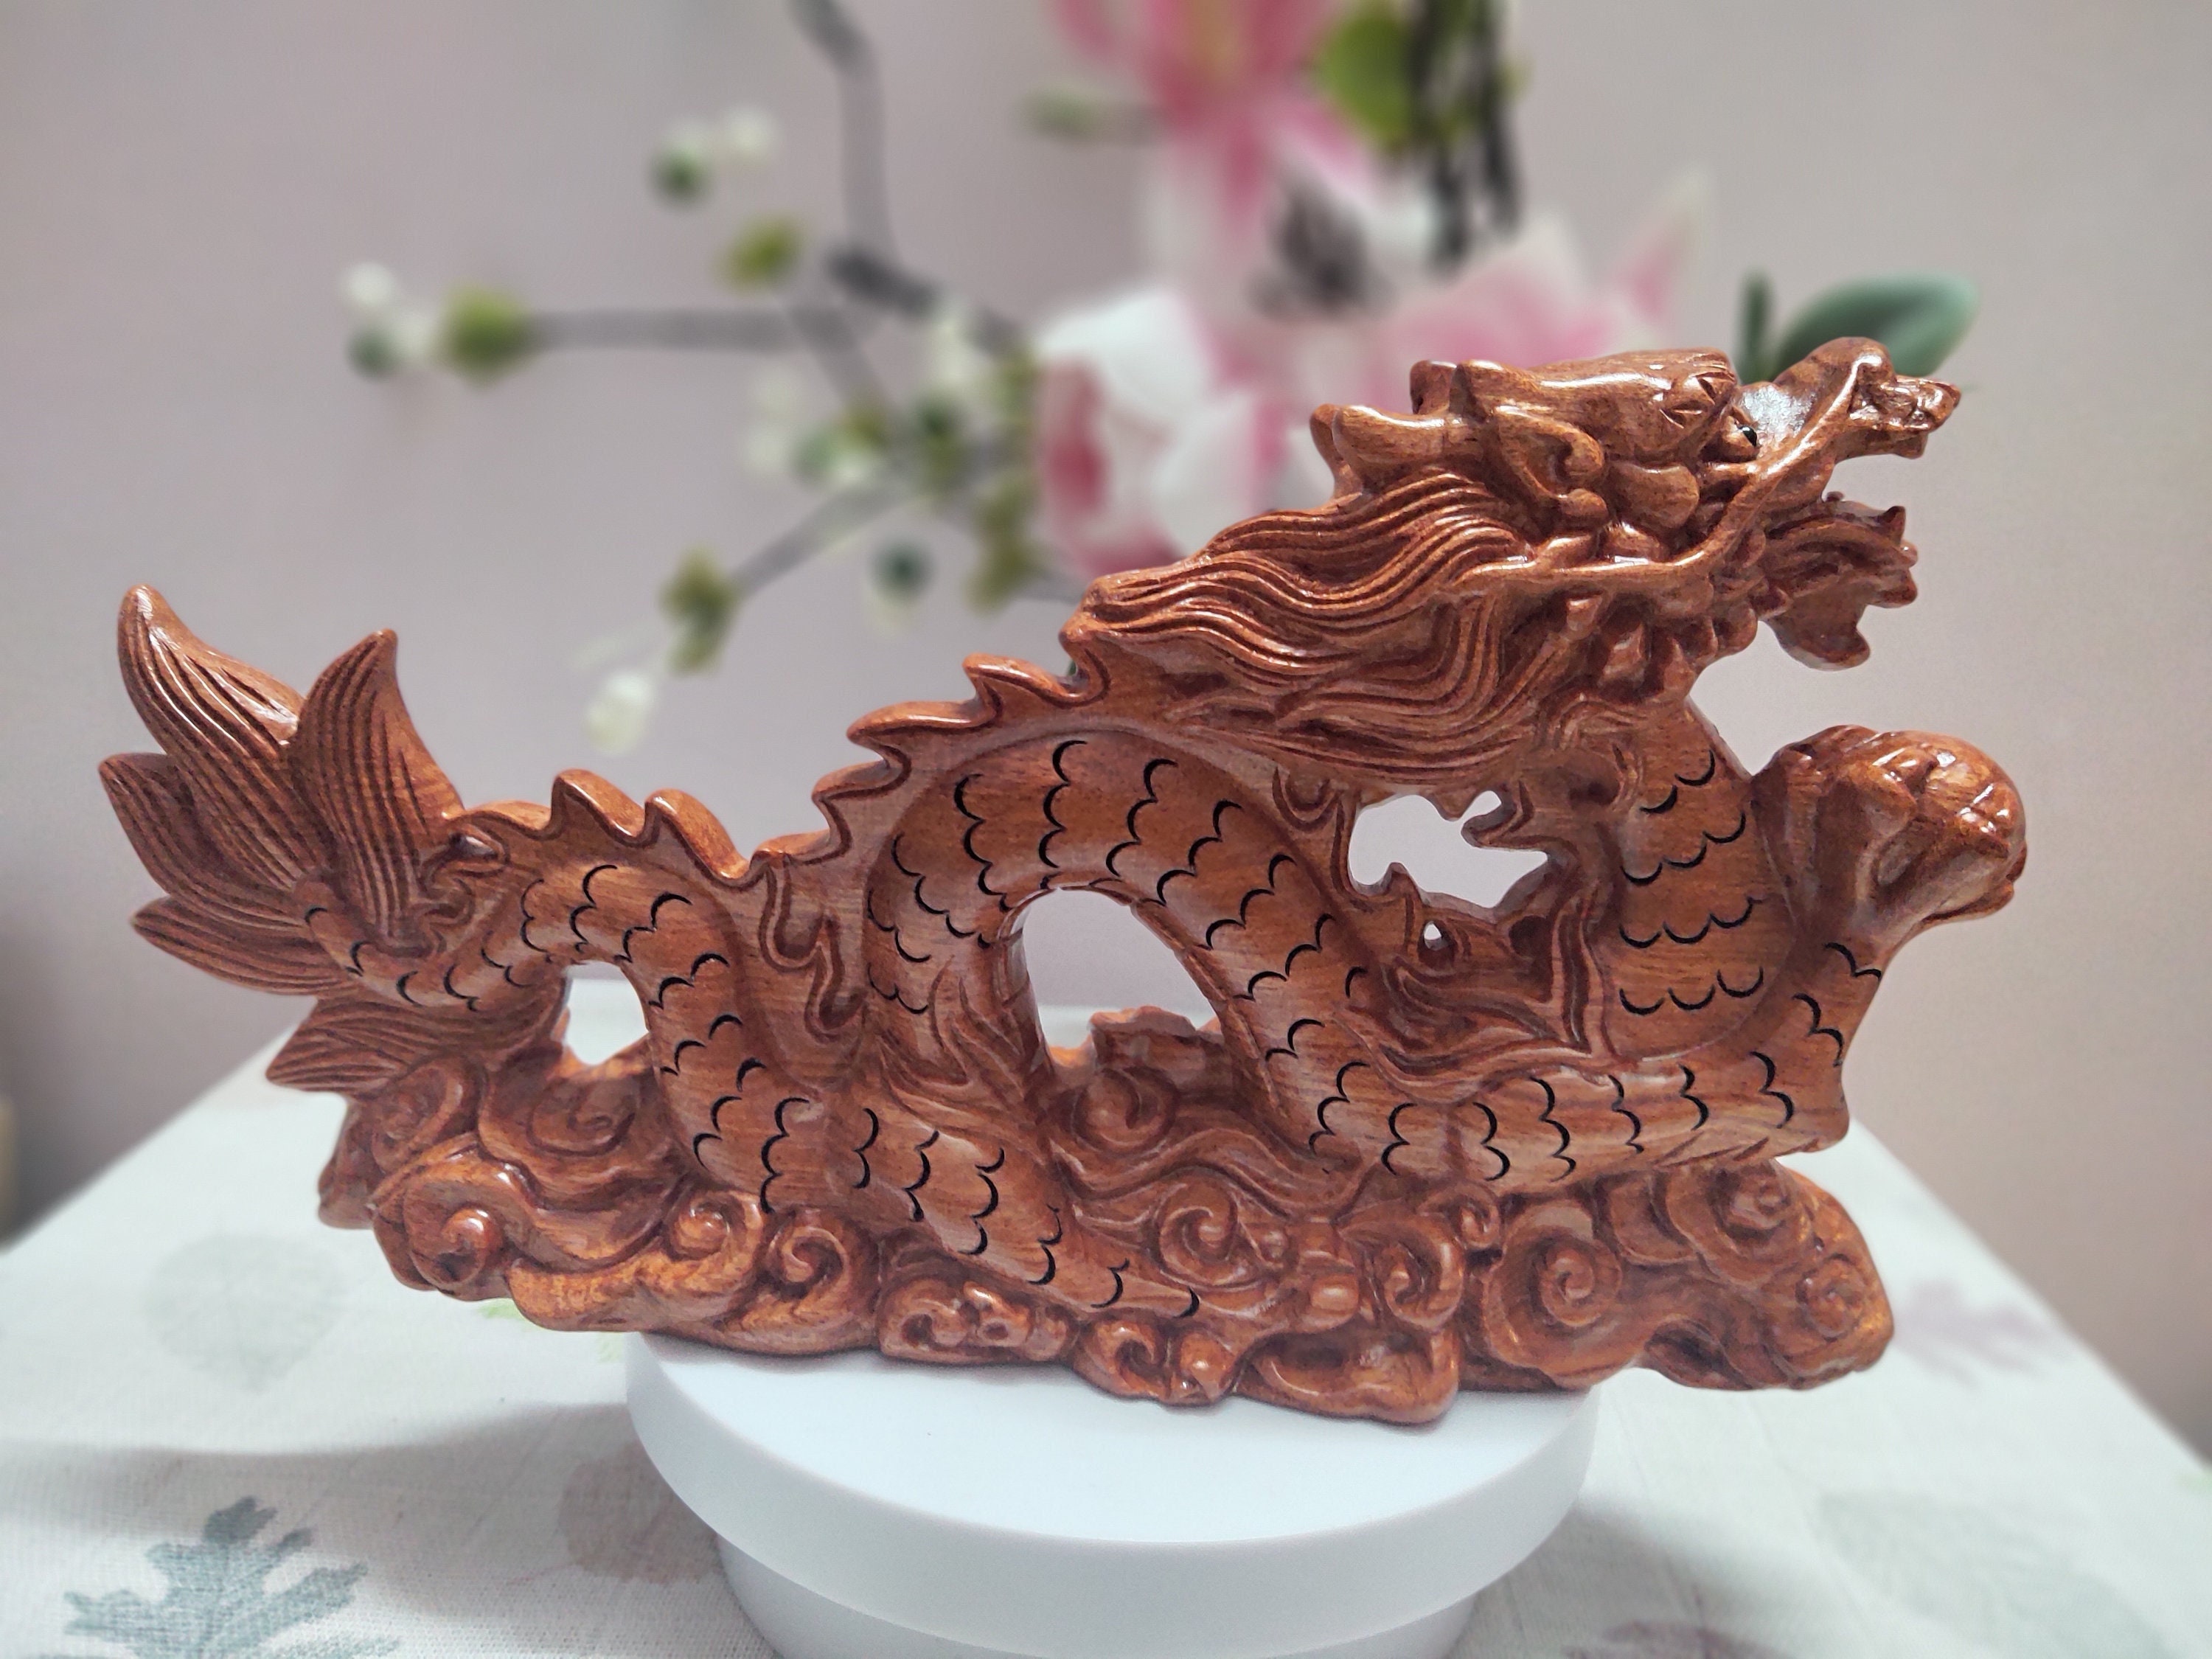  FUNSXBUG X-Large 15.5 INCH Chinese Feng Shui Dragon Statue  Sculpture Figurines Feng Shui Decor Home Office Desktop Decoration Good  Lucky Gifts : Home & Kitchen